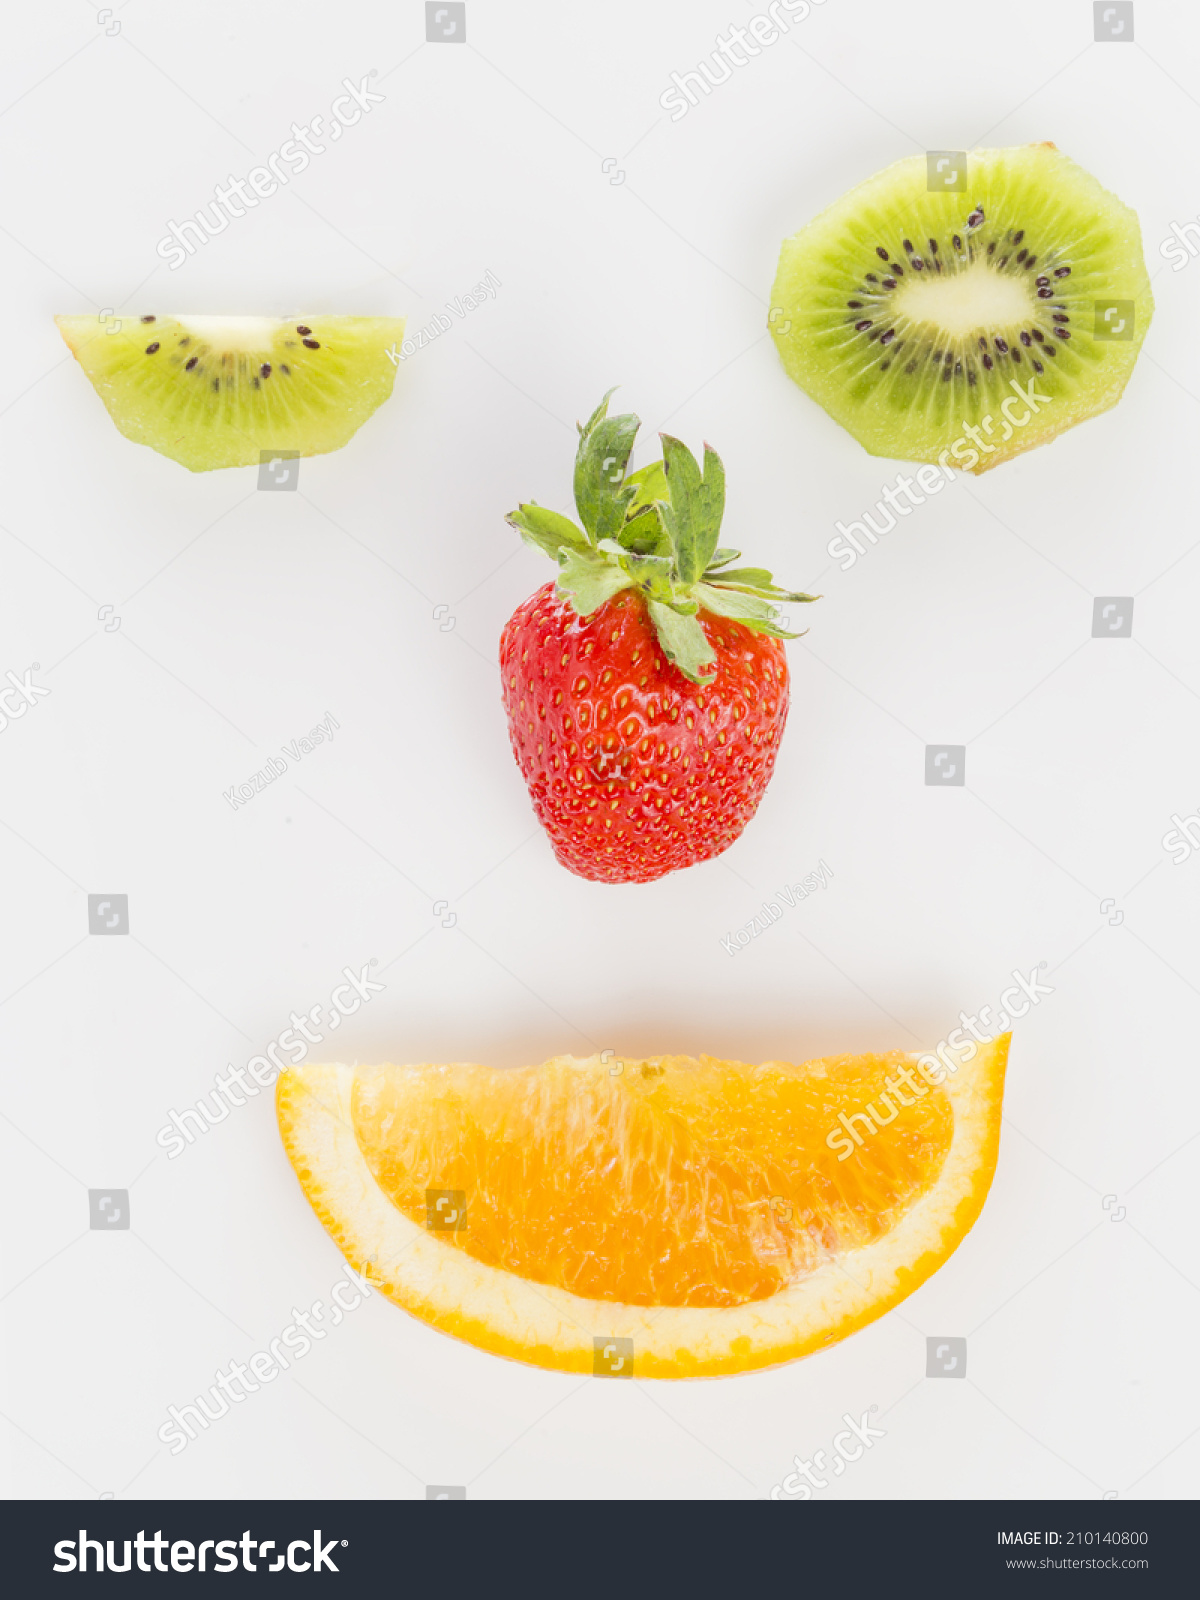 kiwi, strawberry and orange in the shape of the face #210140800